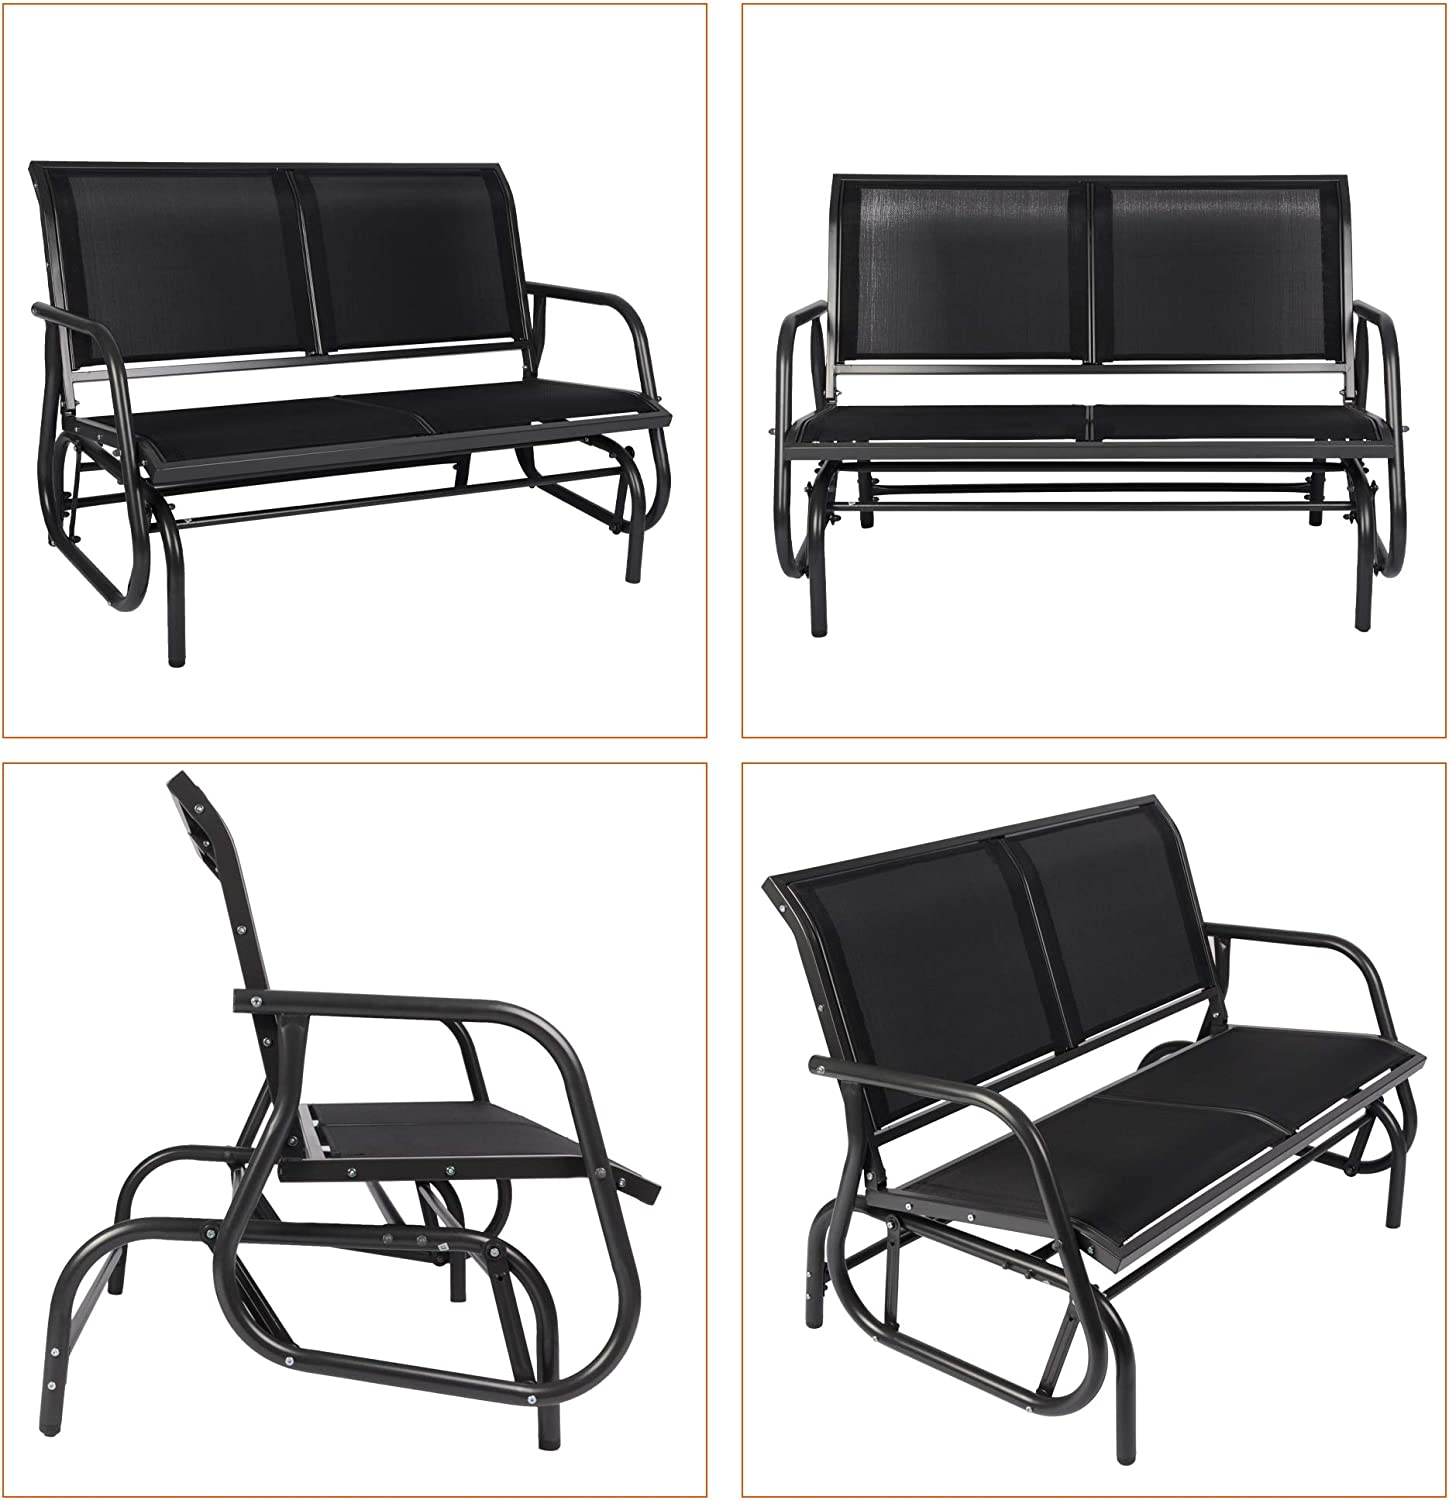 2 Seats Outdoor Patio Glider, Garden Breathable Loveseat Seating Gliding Swing Bench Chair with Anti-Rust Coating